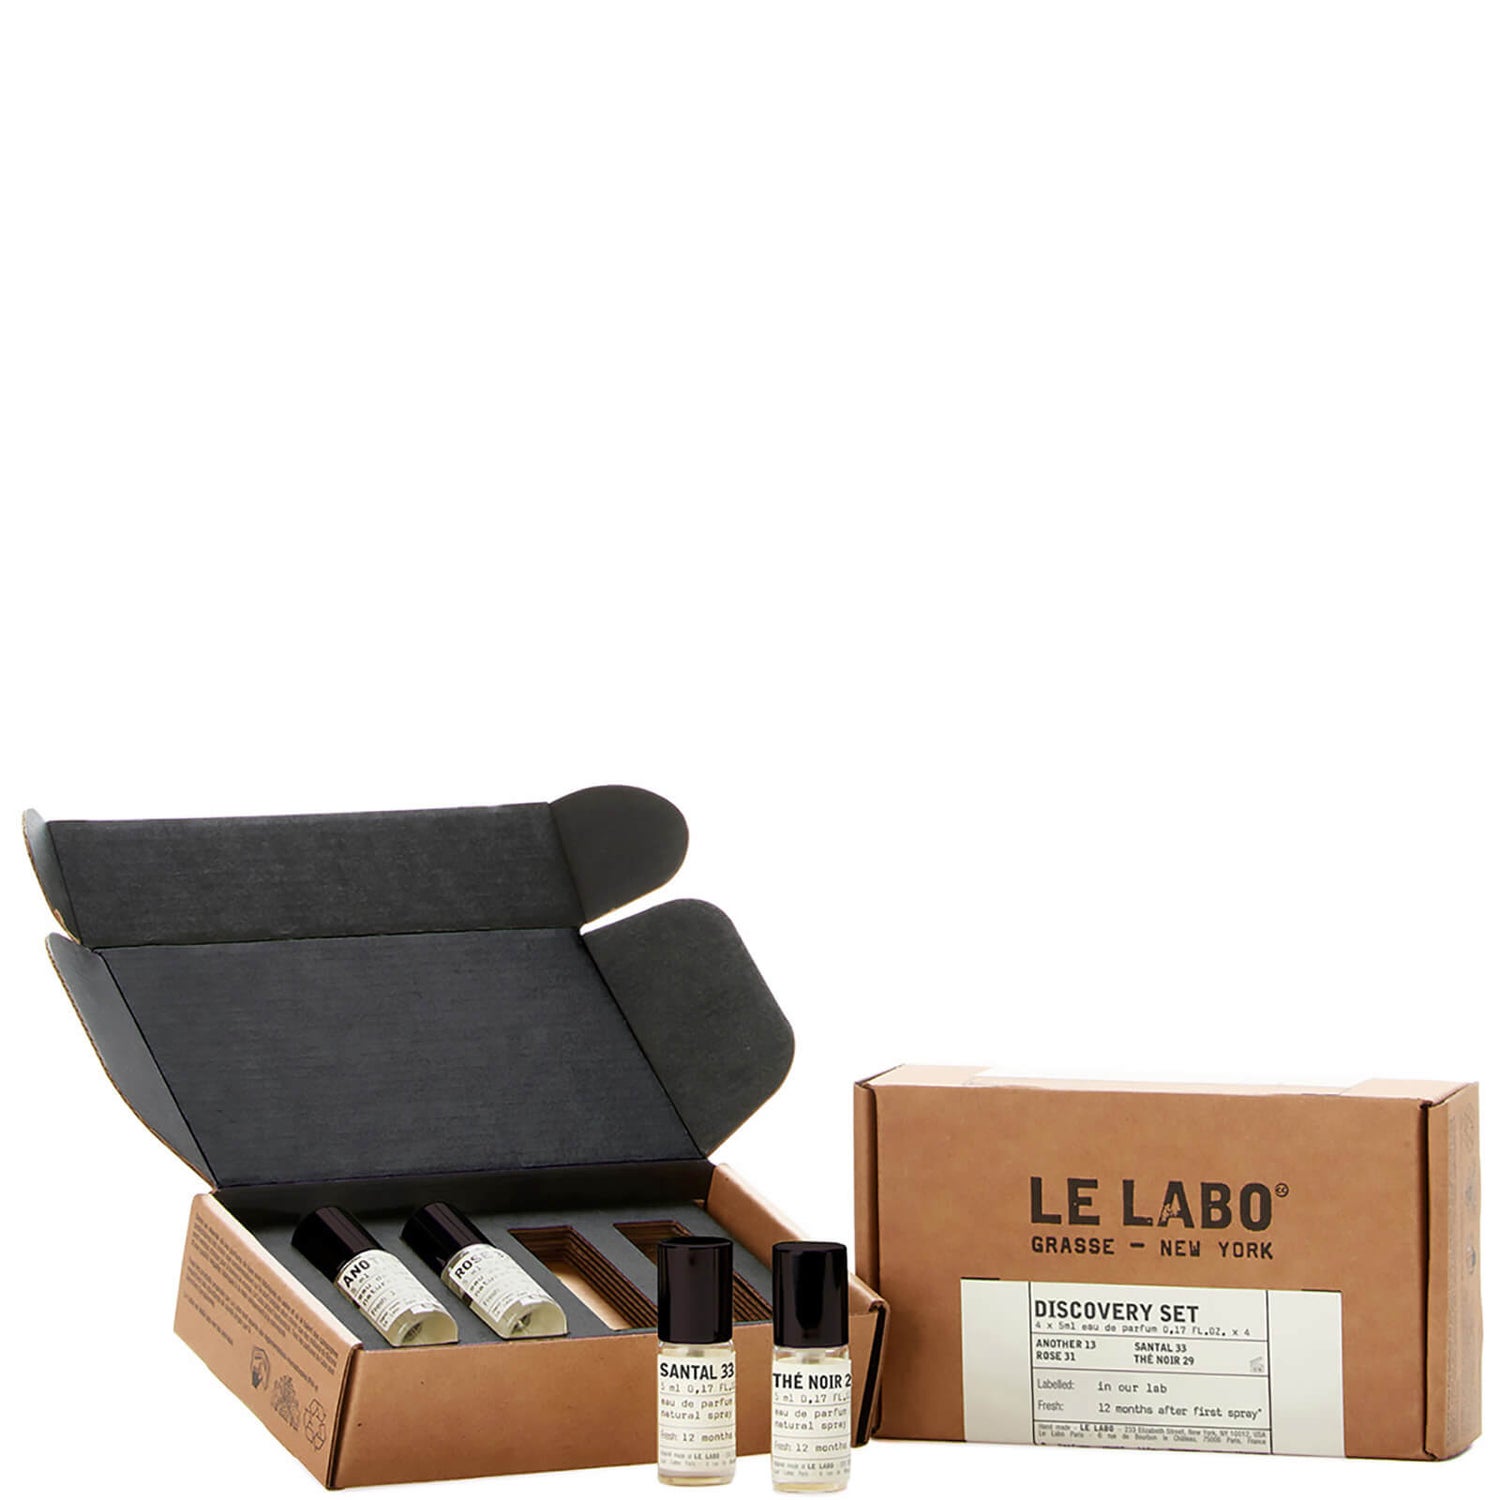 Le Labo Holiday Discovery Kit